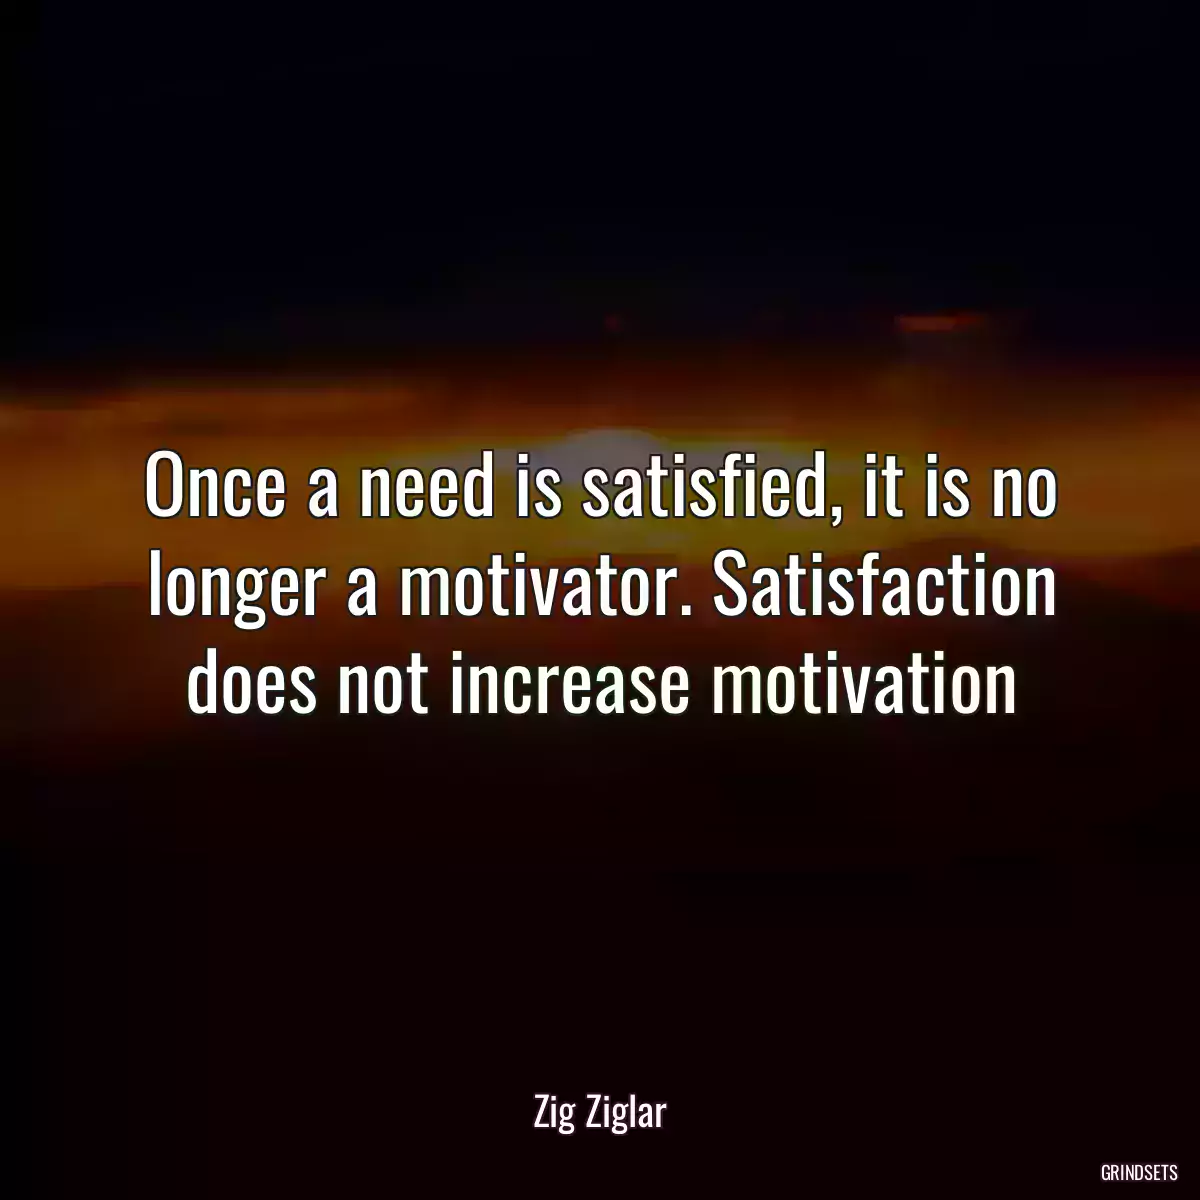 Once a need is satisfied, it is no longer a motivator. Satisfaction does not increase motivation